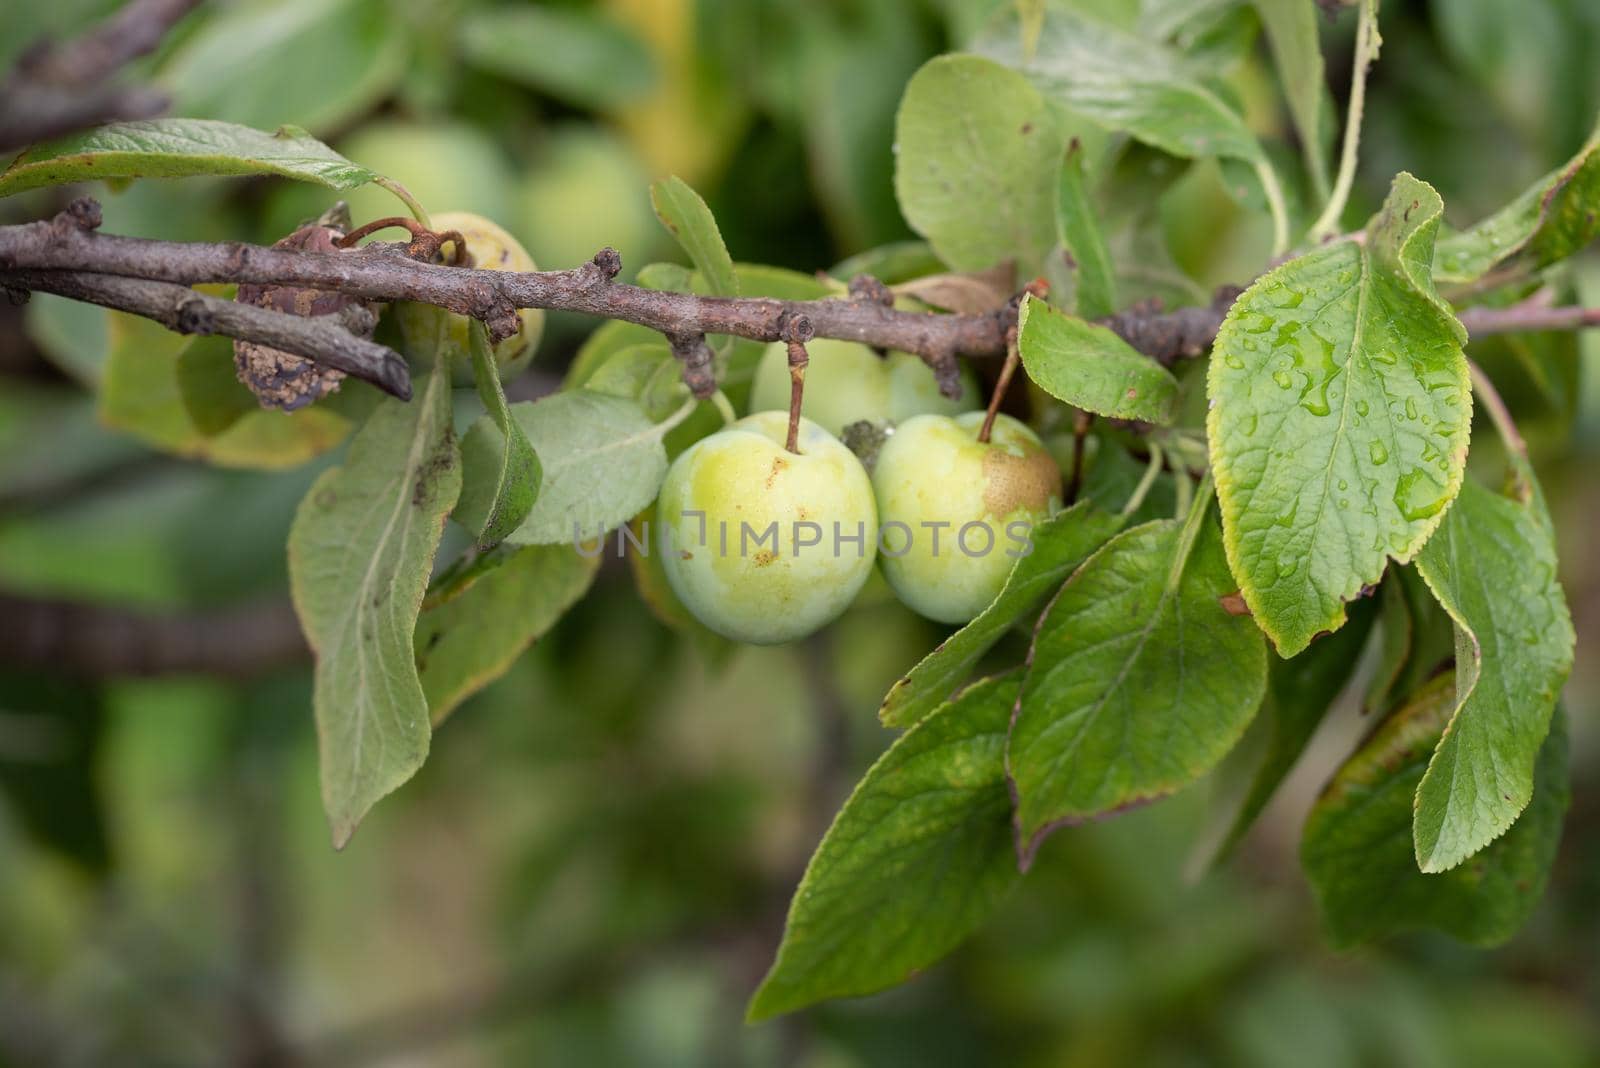 Naturalistic view of two unripe green plum by Estival